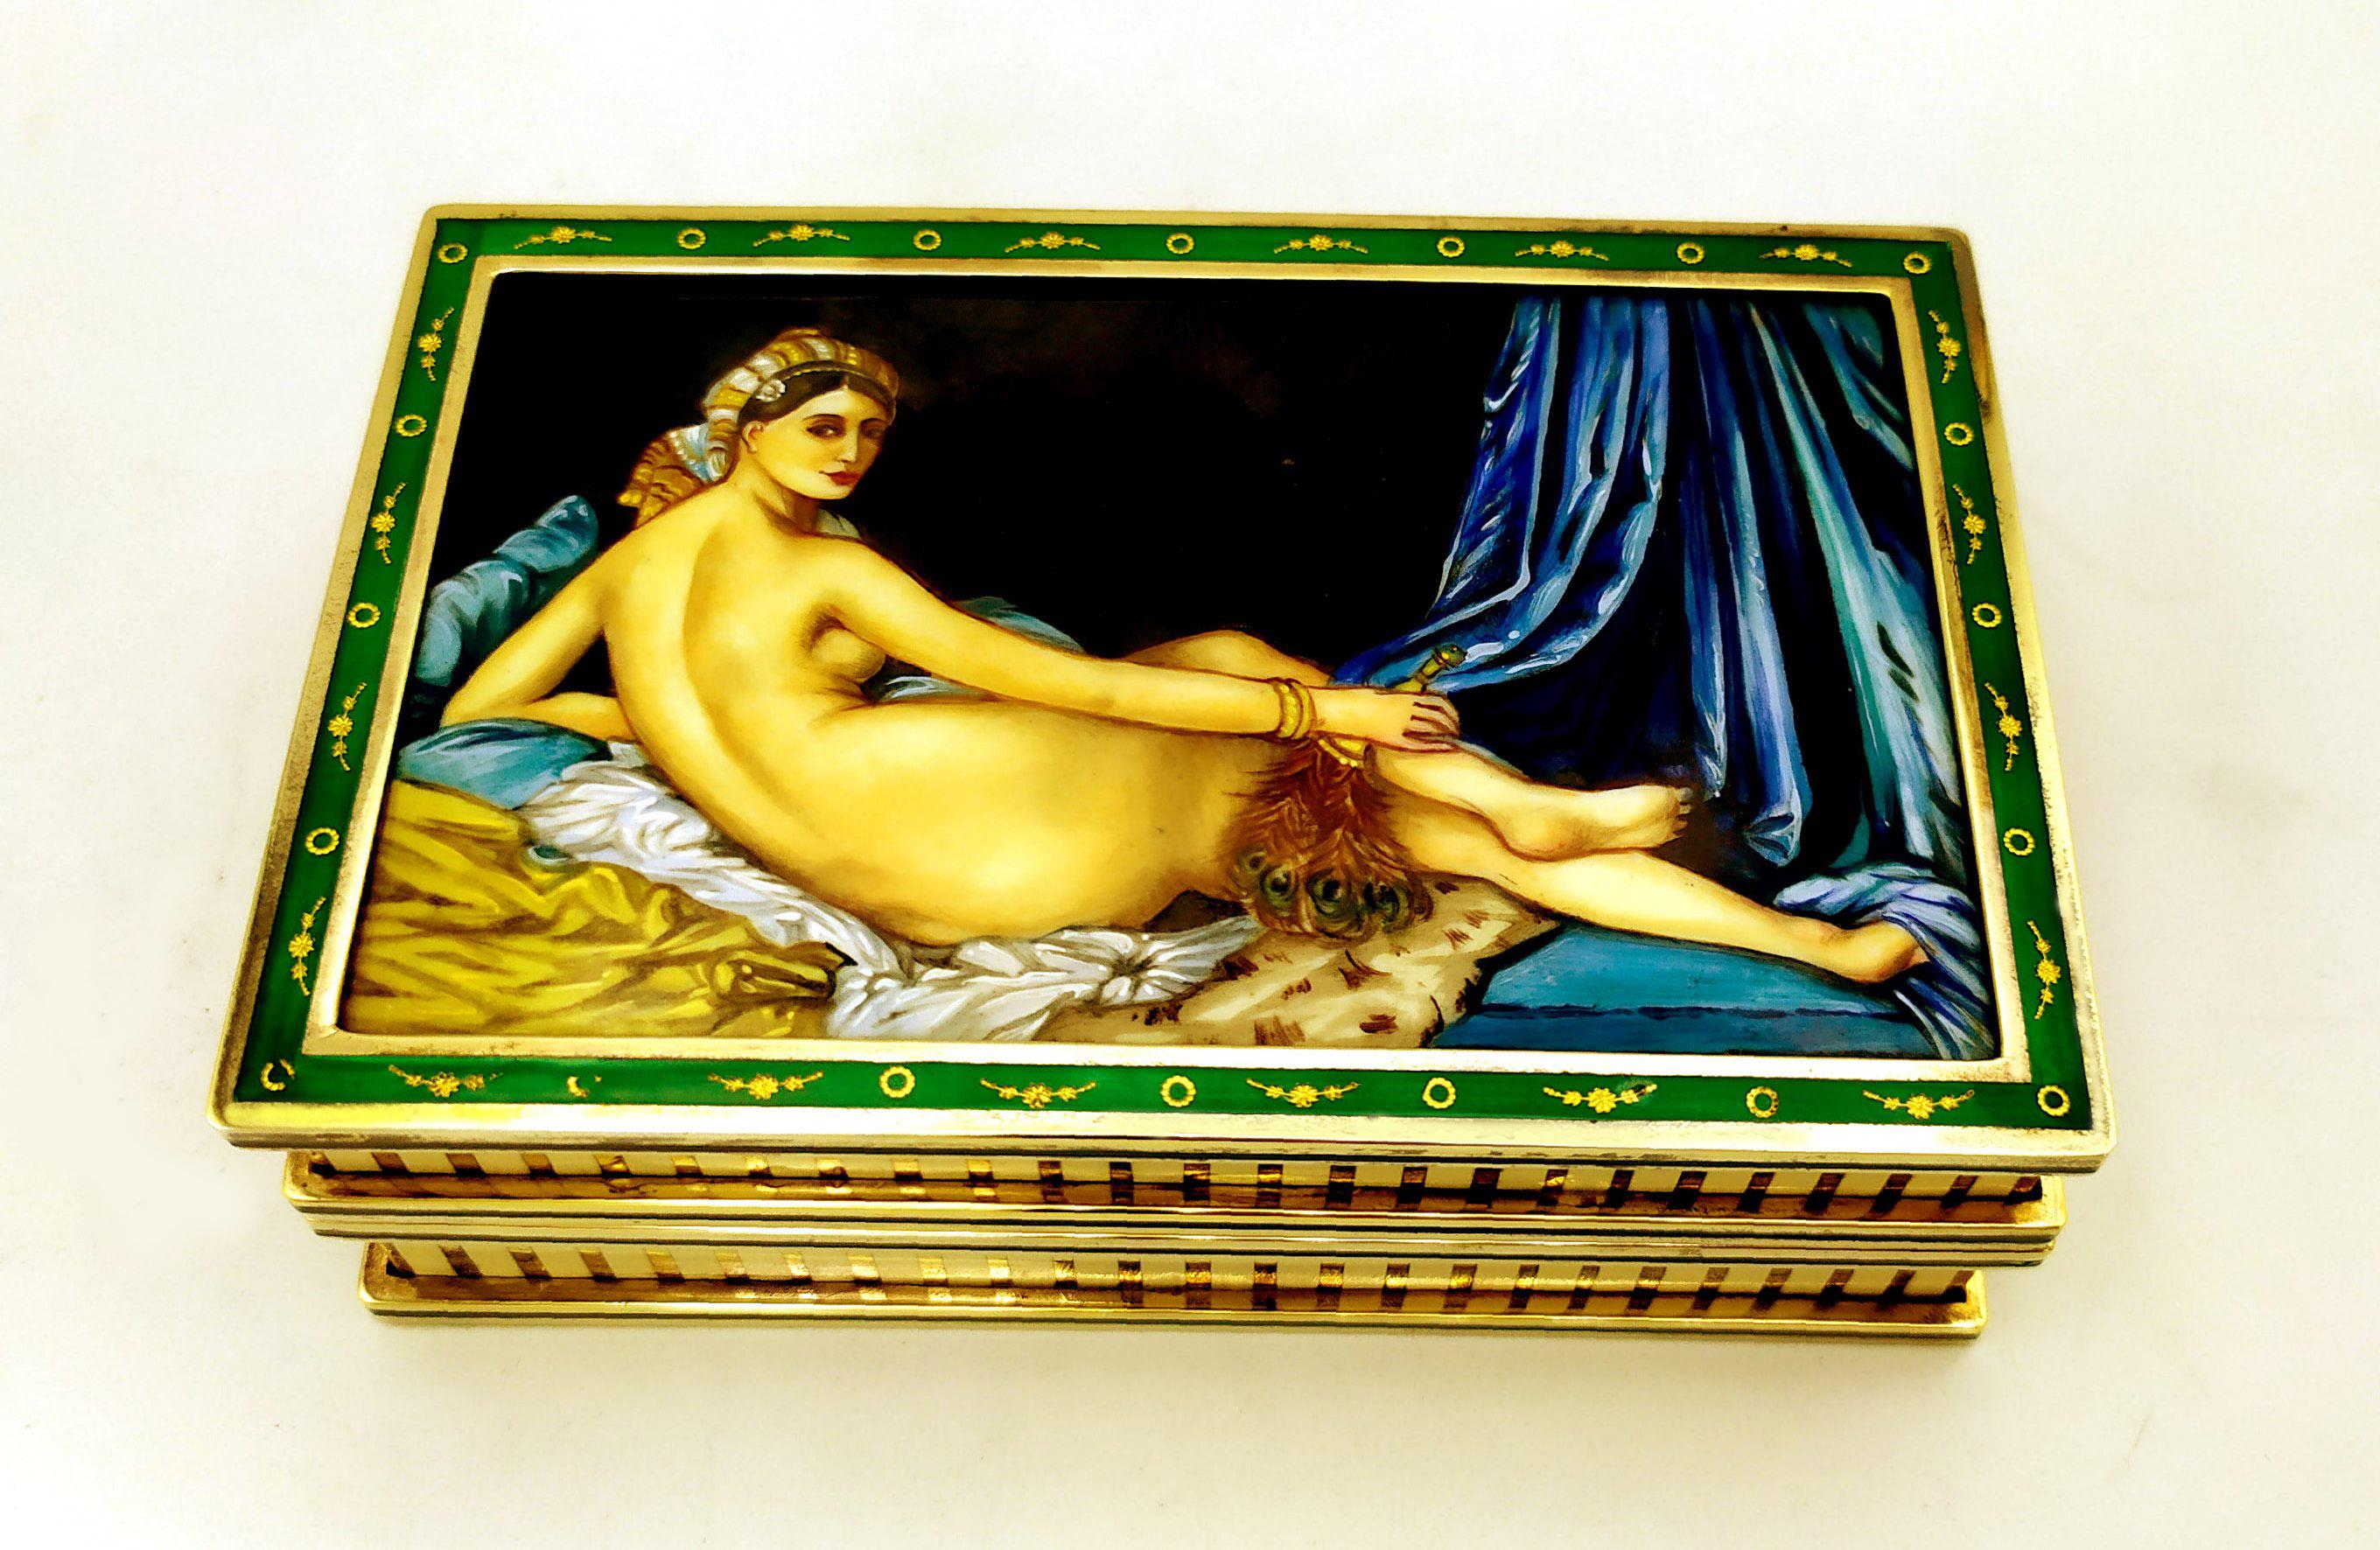 table box in sterling silver 925/1000 gold plated with edges with fire - enamelled stripes and upper frame with insertion of paillons in pure gold and beautRectangular iful fire-enamelled miniature painted by the painter Beatrice Mellana reproducing